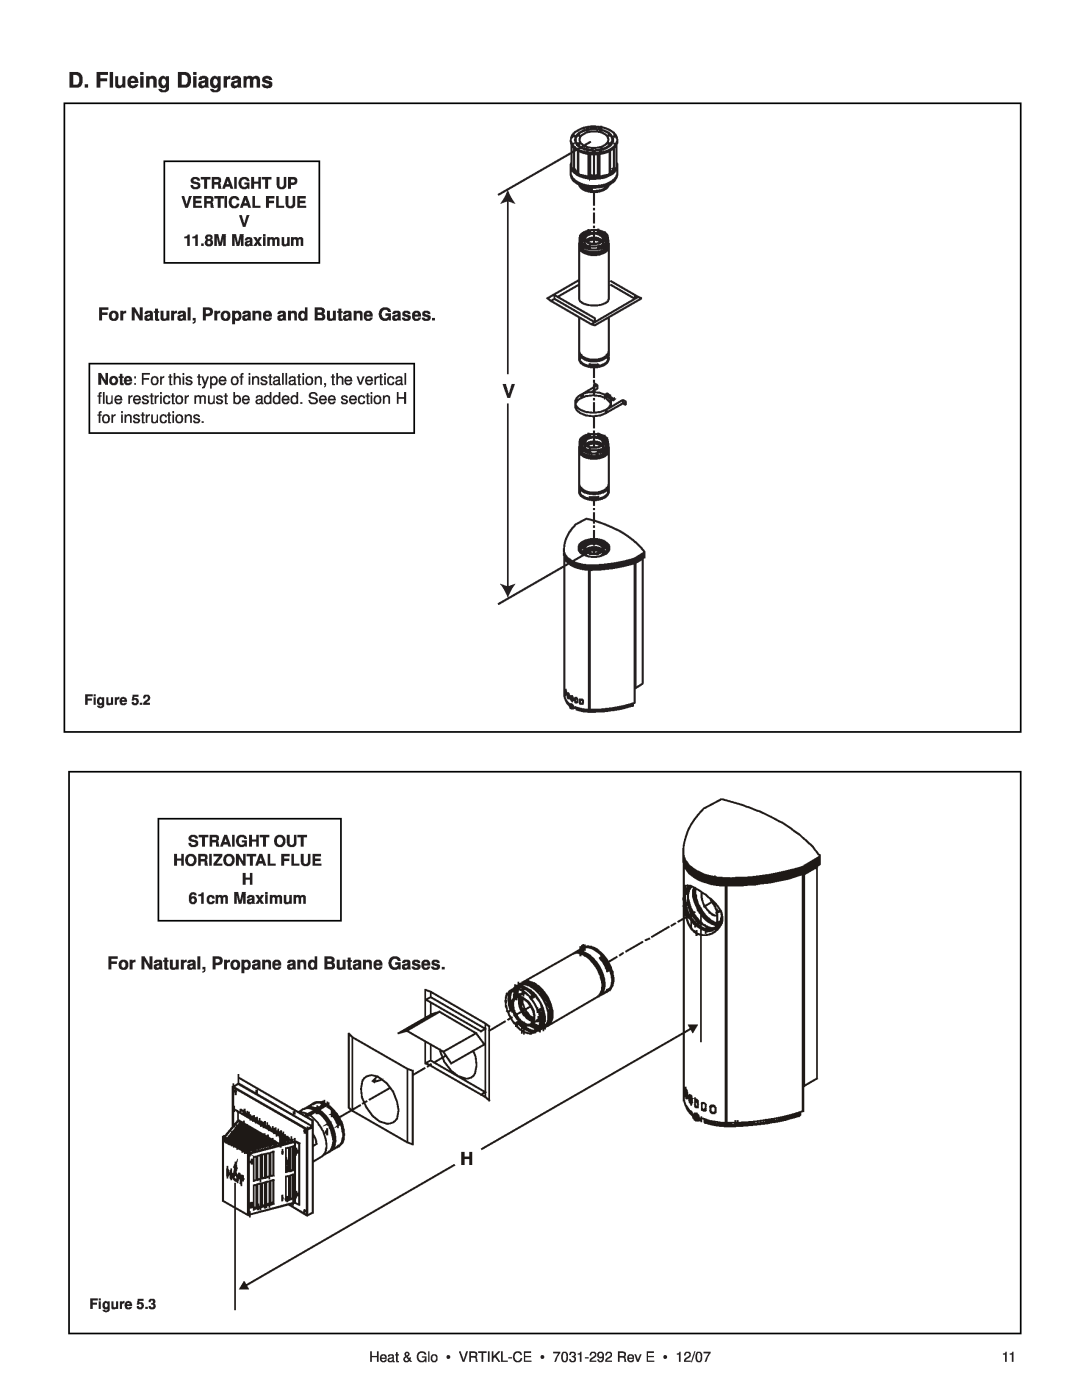 Hearth and Home Technologies VRT-GY-P-CE D. Flueing Diagrams, For Natural, Propane and Butane Gases, for instructions 